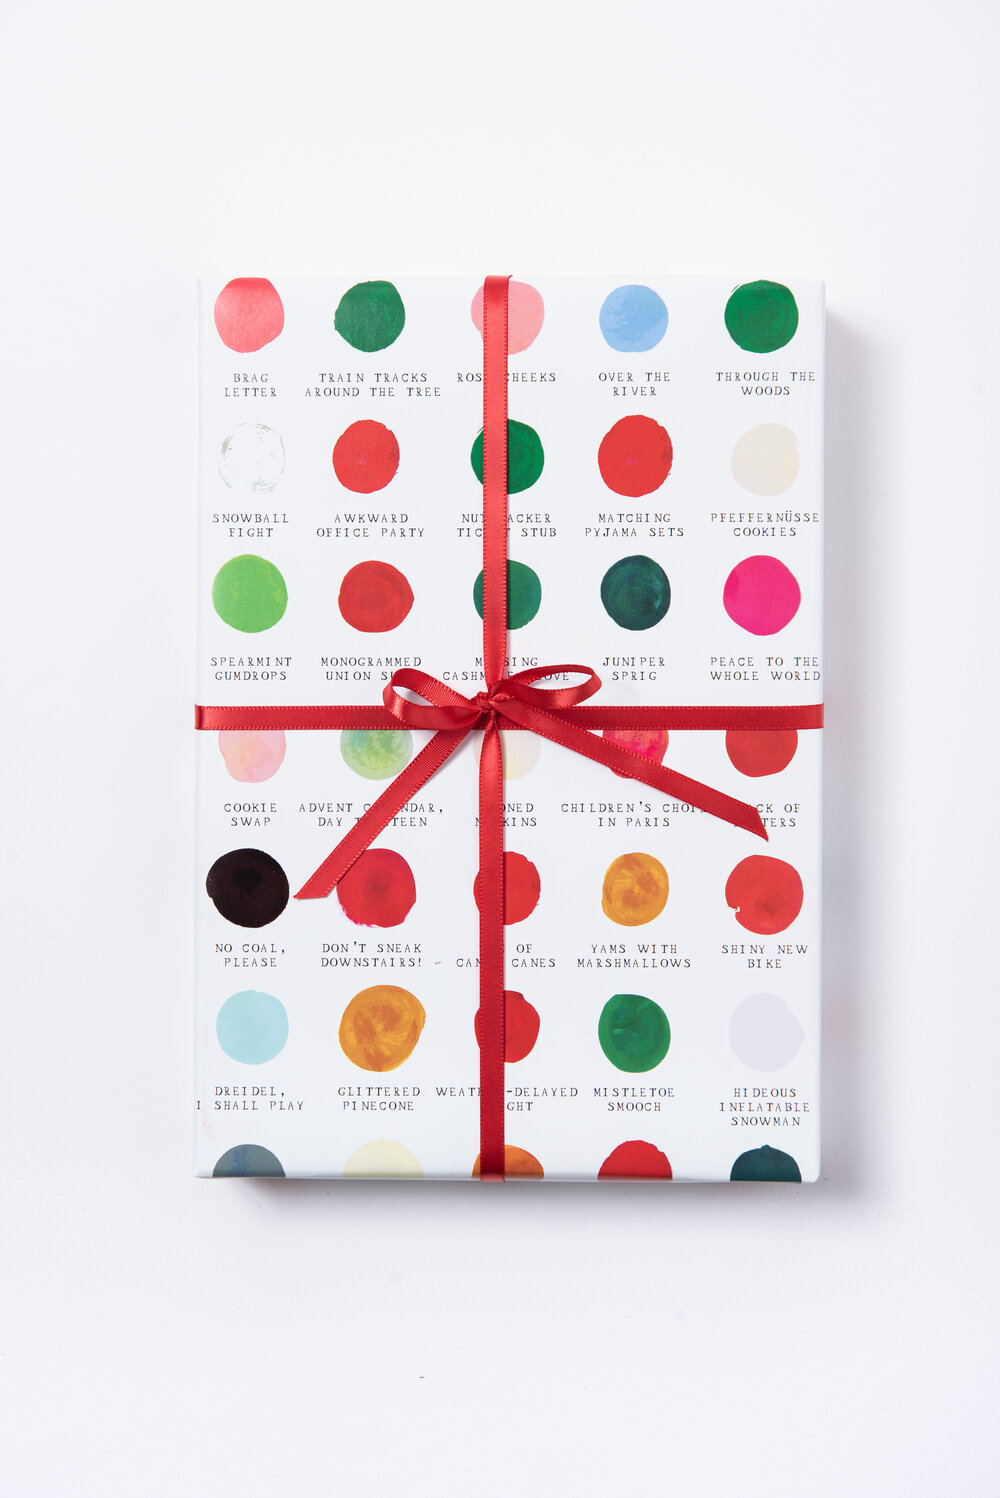 THAT'S A WRAP! Pretty Wrapping Paper Ideas - ROWE SPURLING PAINT